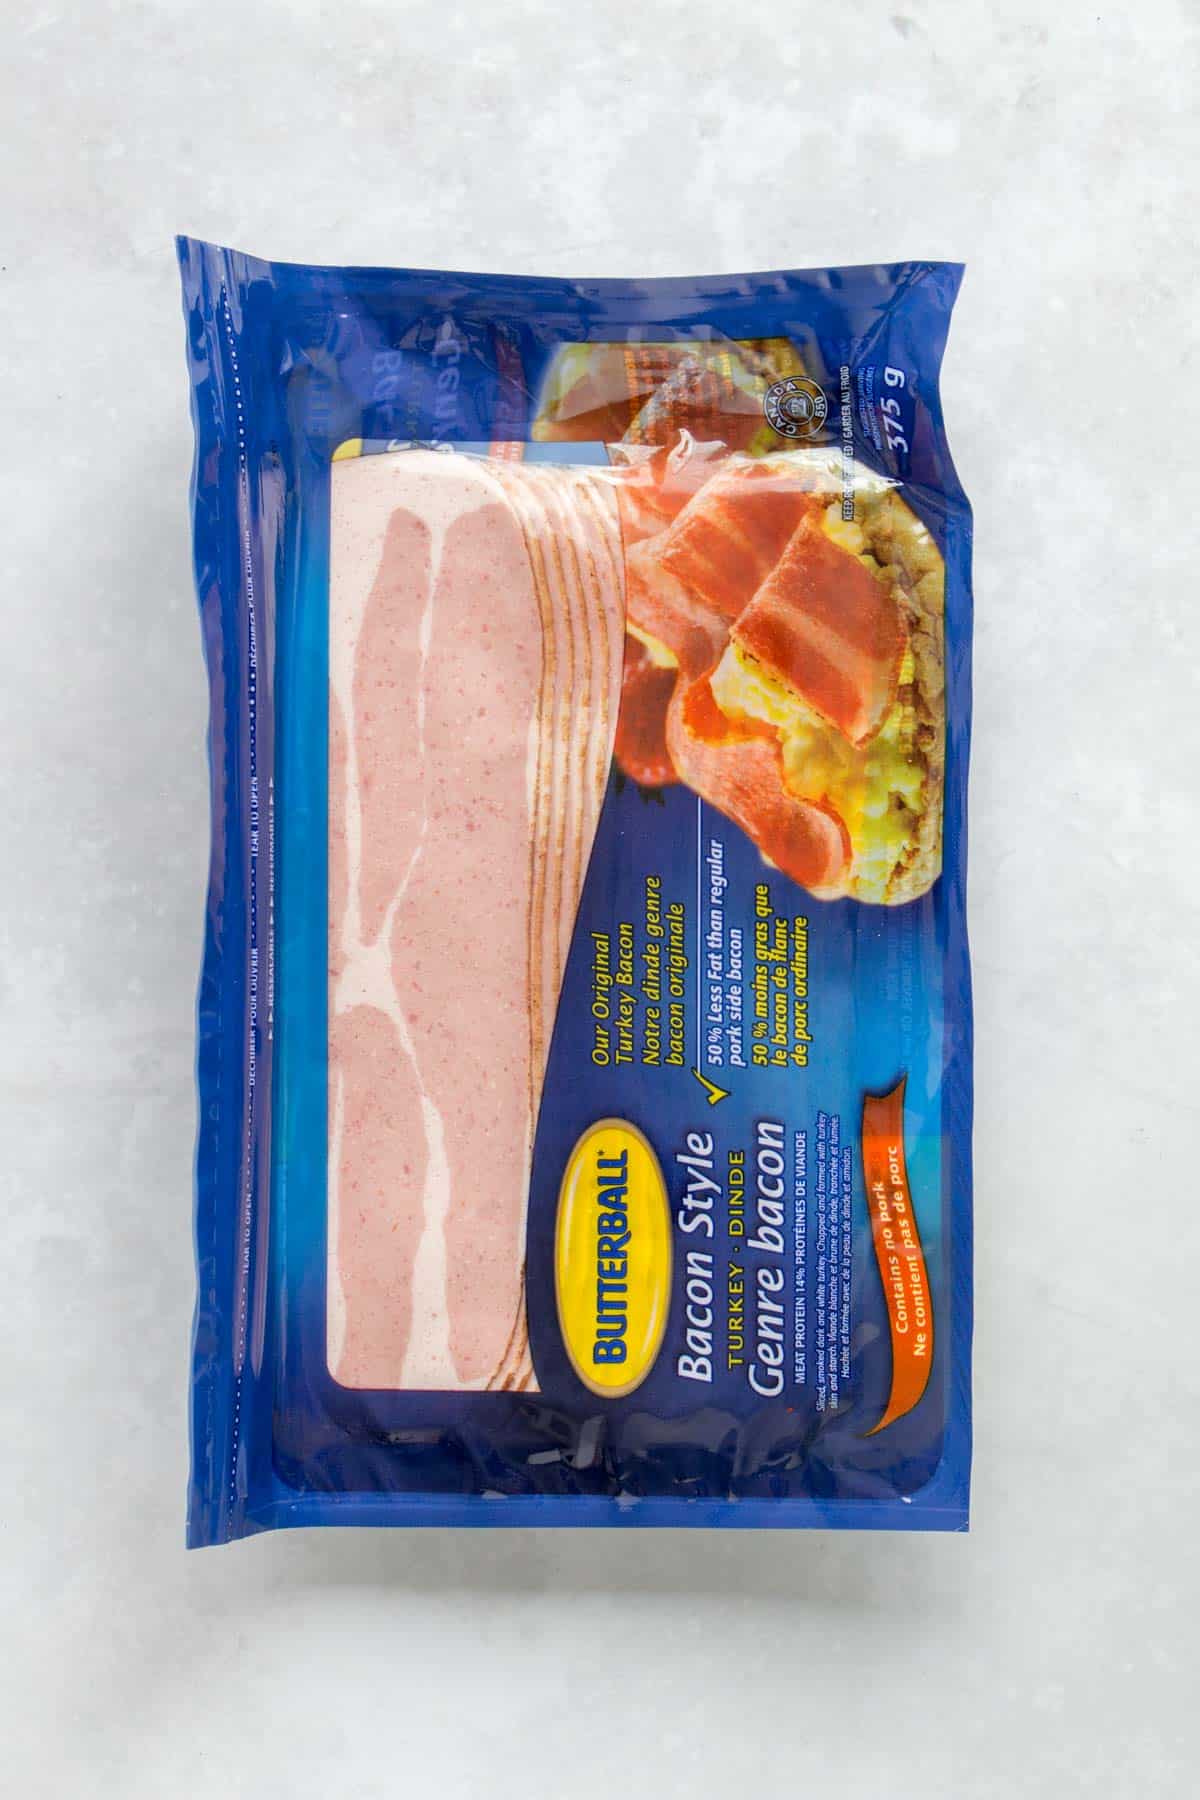 A package of turkey bacon.